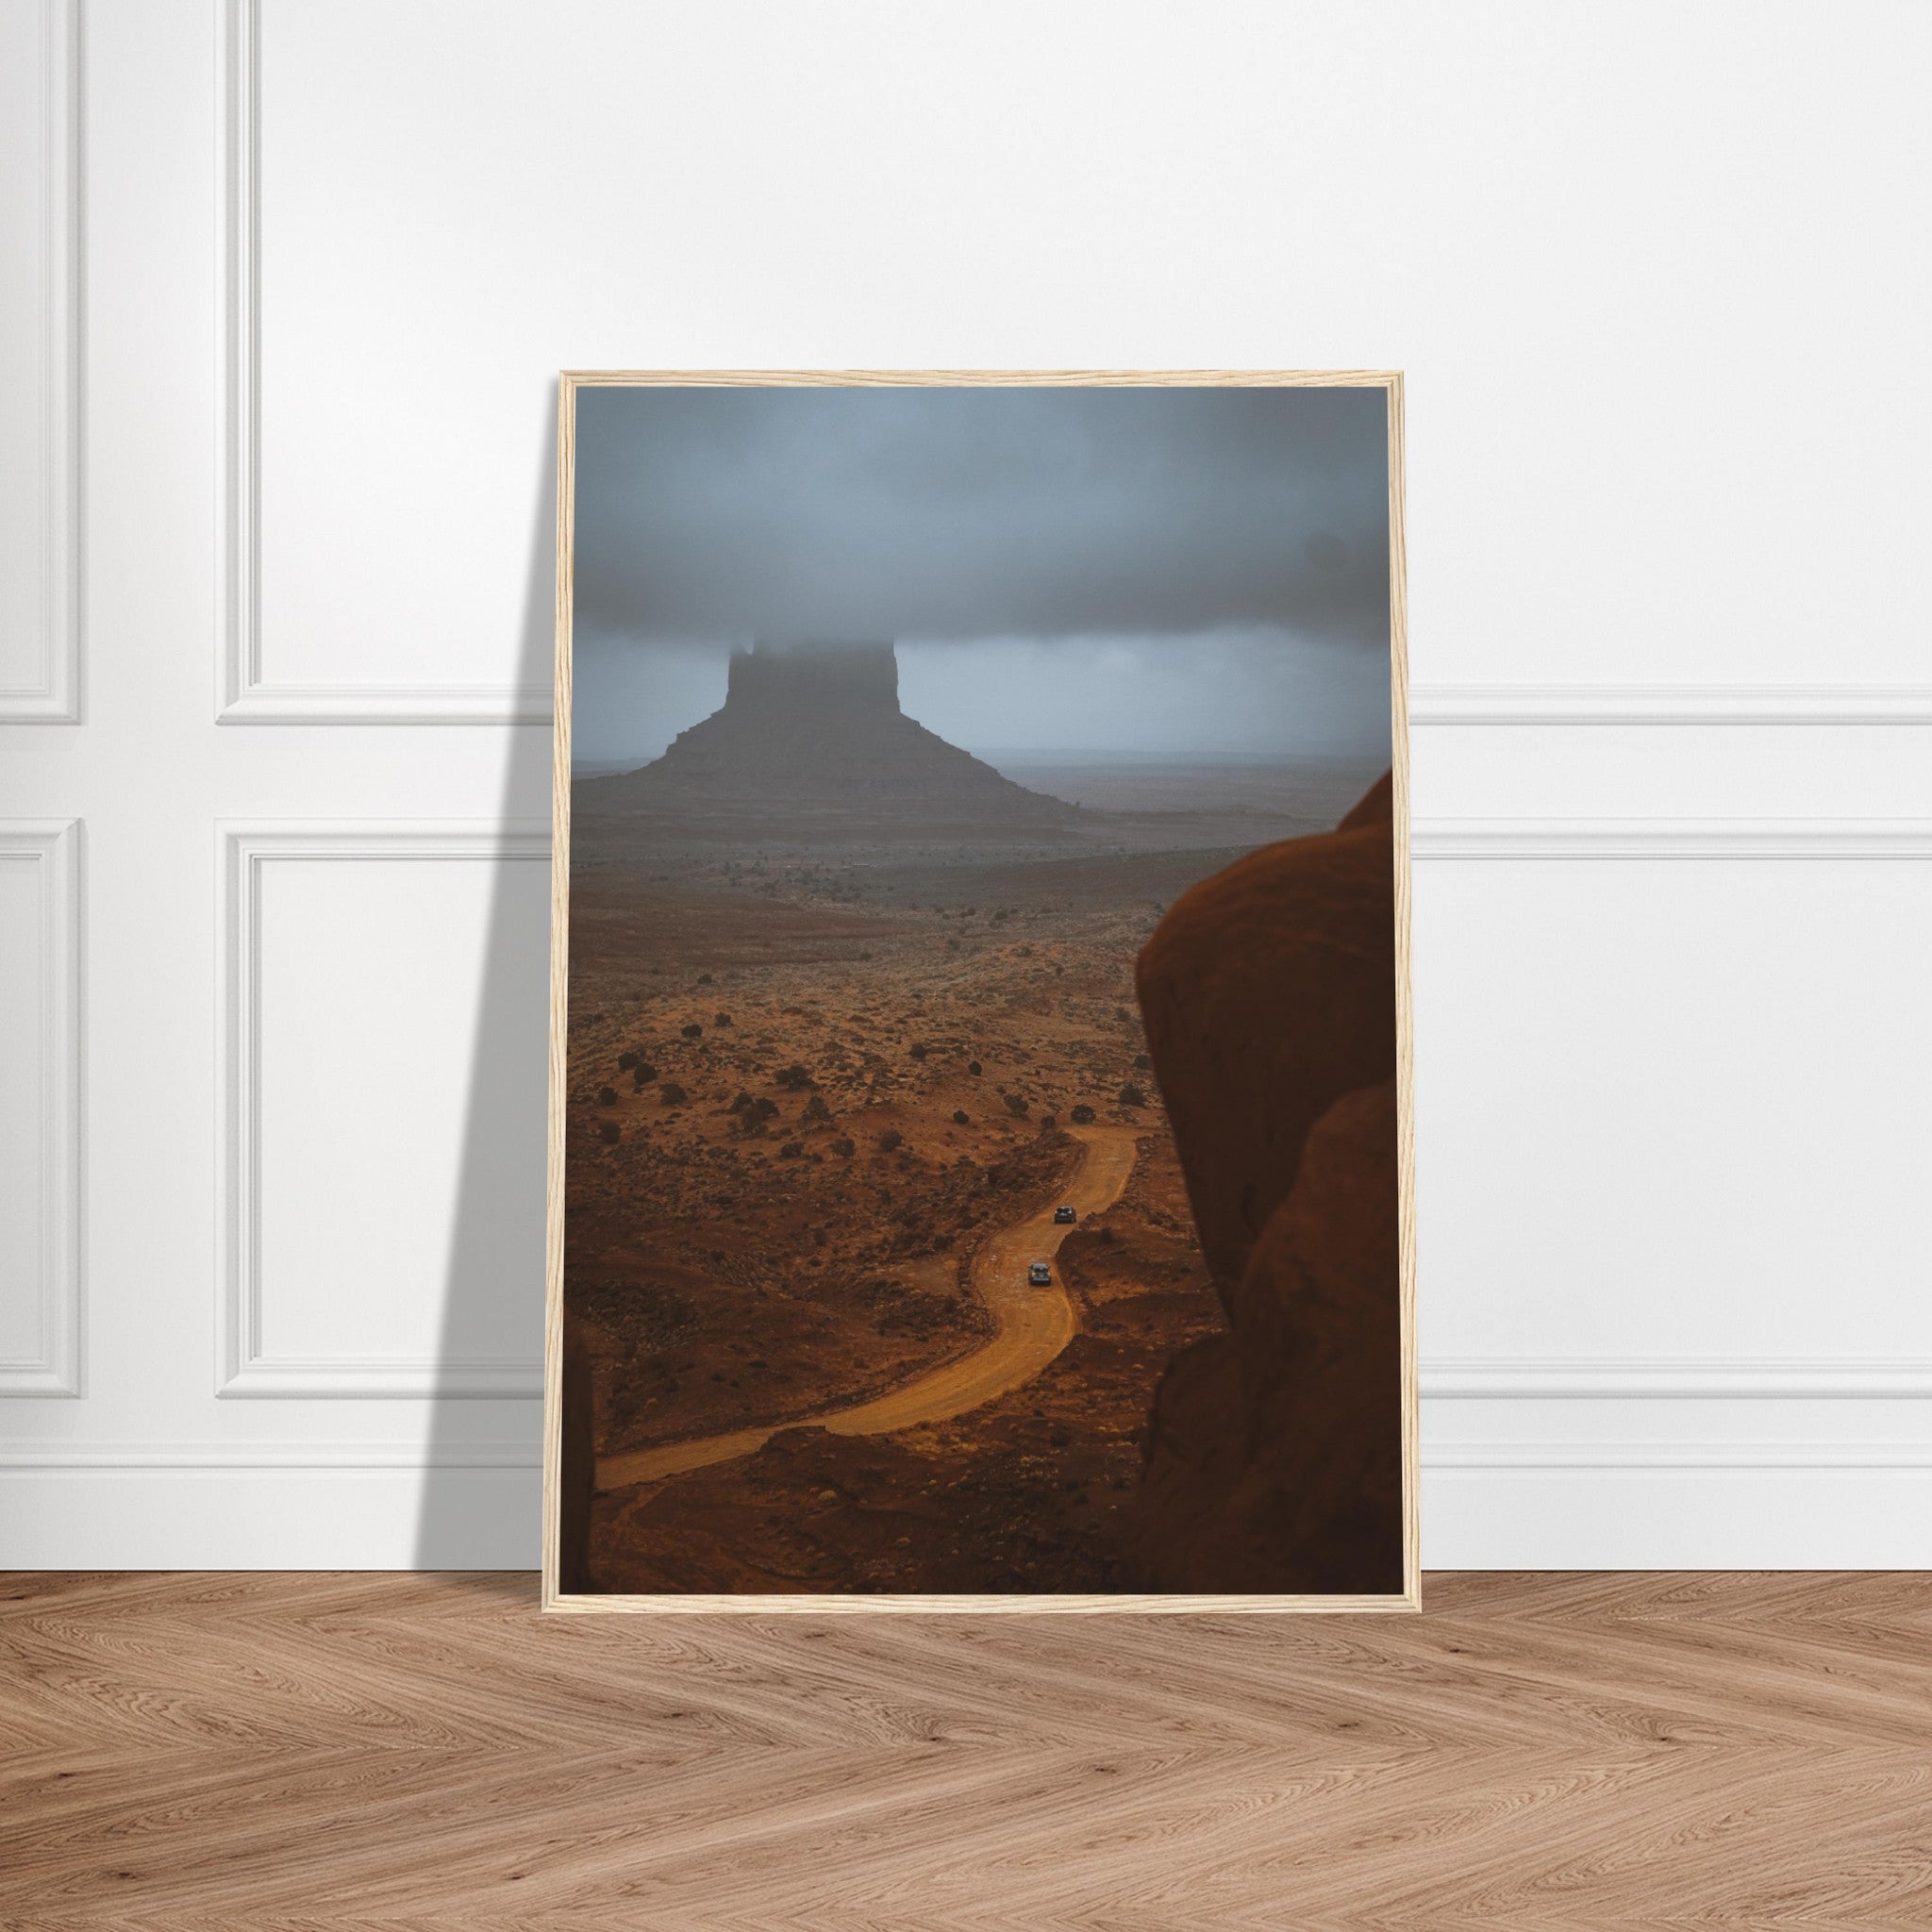 Shrouded Majesty: The Lonely Sentinel of Monument Valley